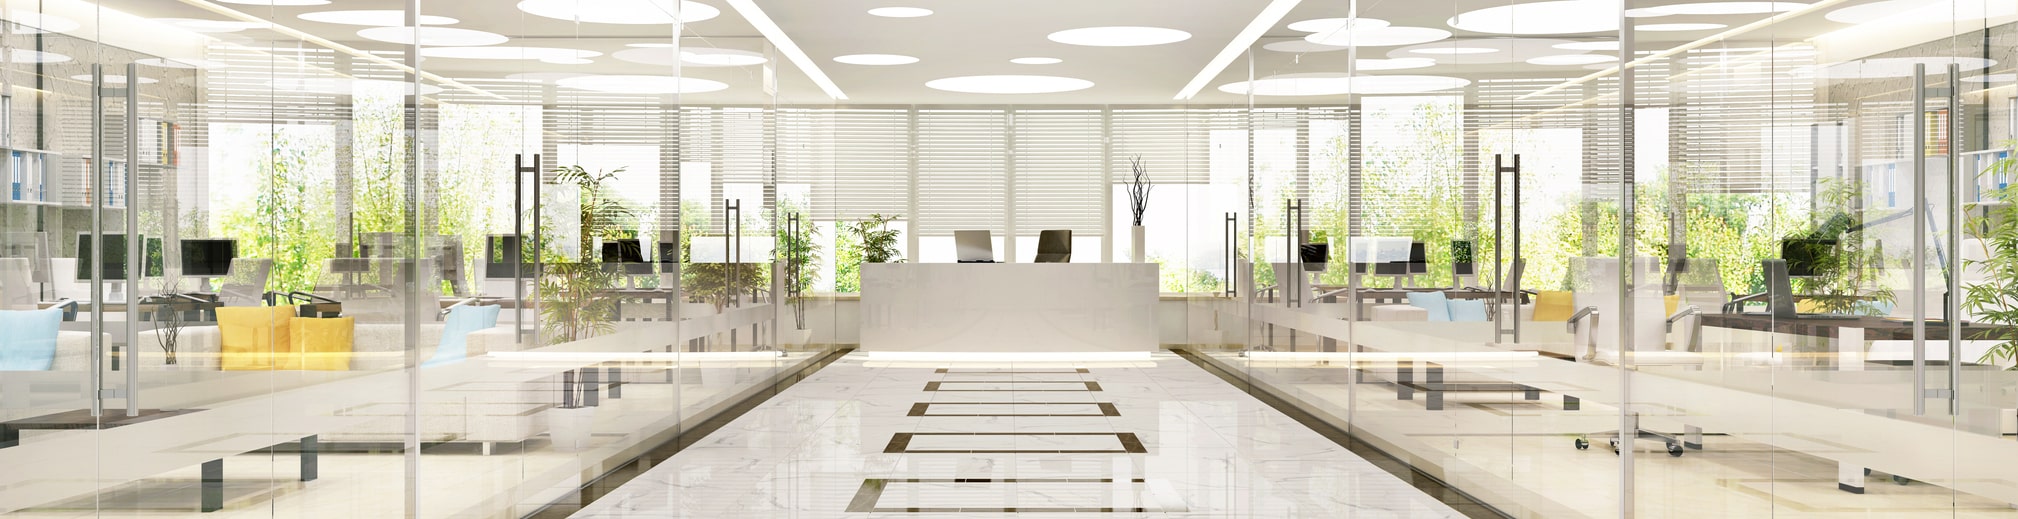 Interior lighting for commercial space